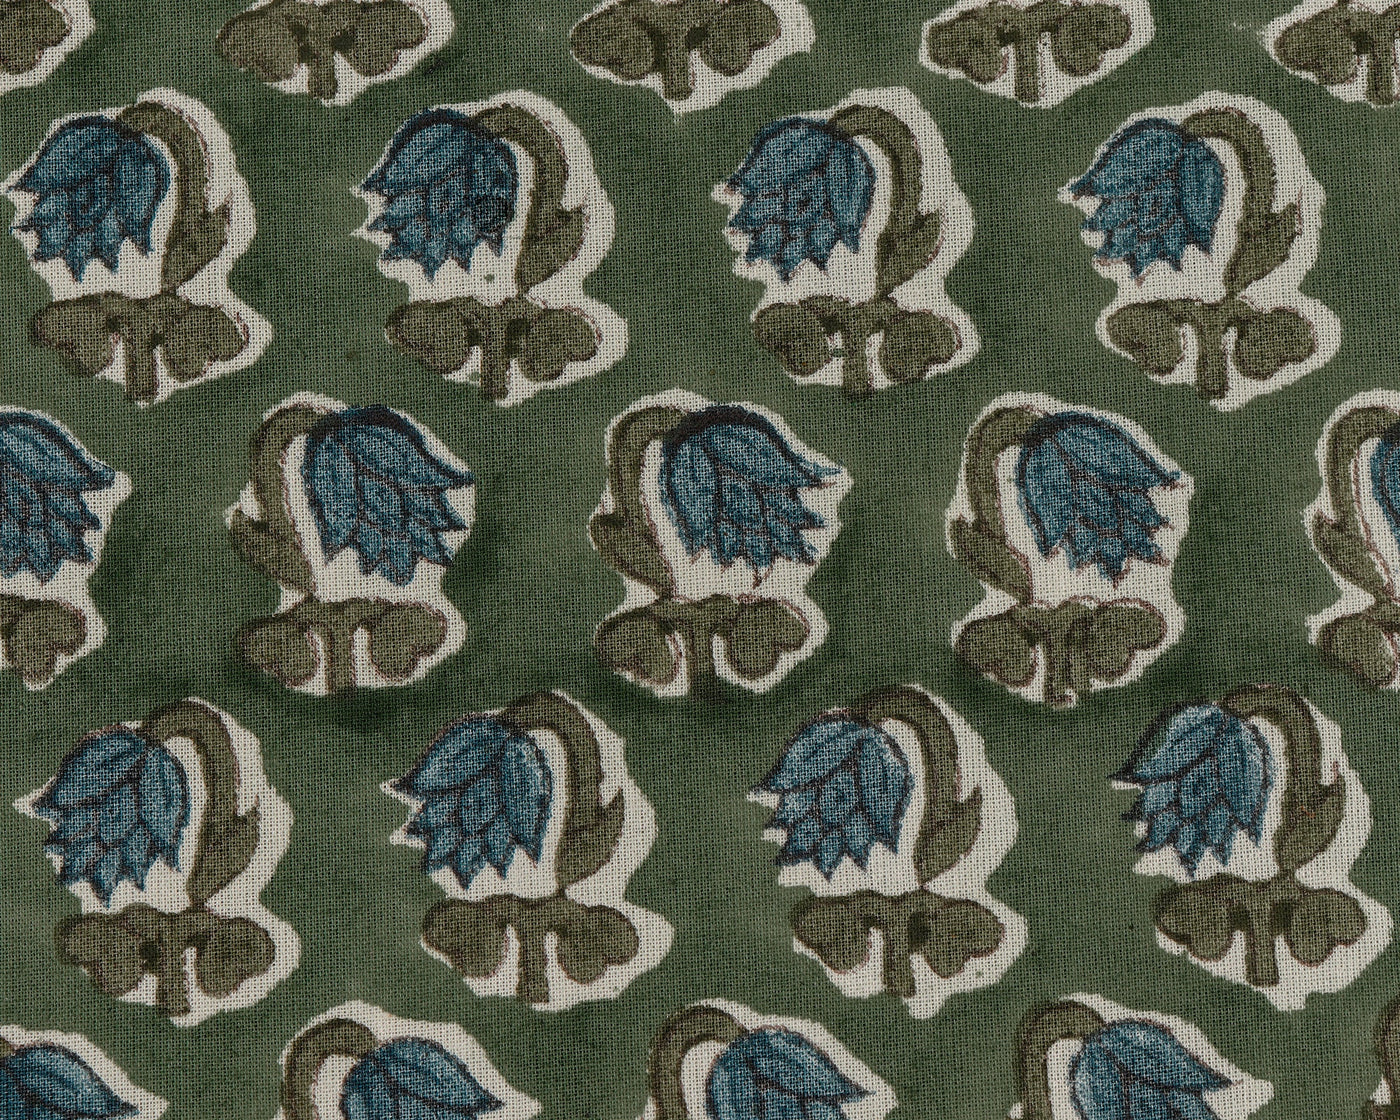 Basil Green, Peacock Blue Indian Floral Hand Block Printed 100% Pure Cotton Cloth Napkins, 18x18"- Cocktail Napkins, 20x20"- Dinner Napkins